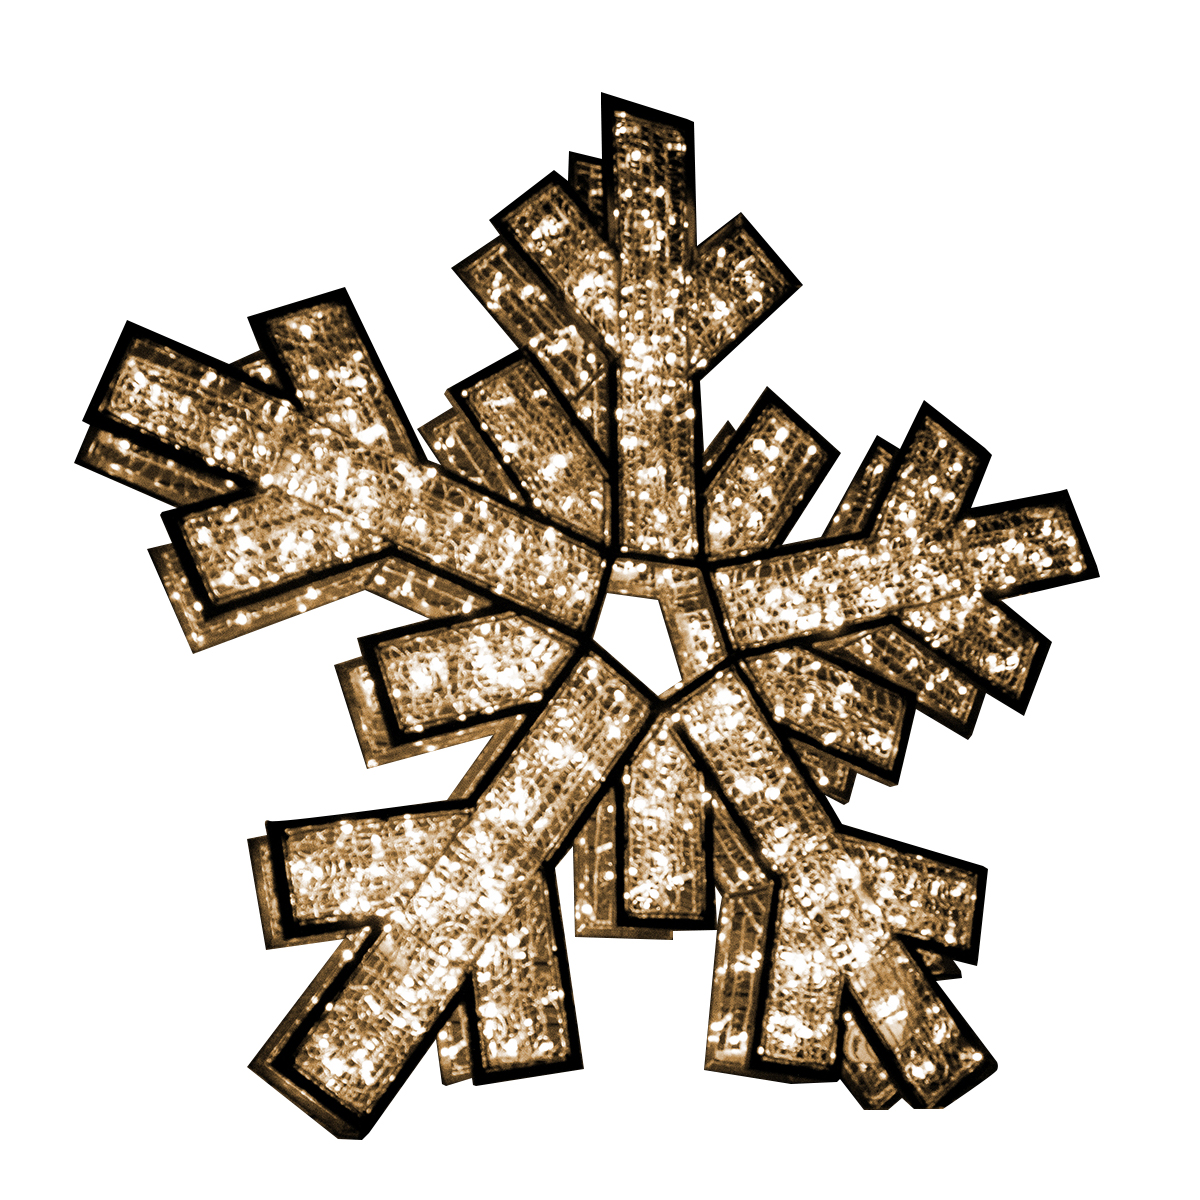 3D Gold 2 Sided Snowflake, WW LED Lights, Large